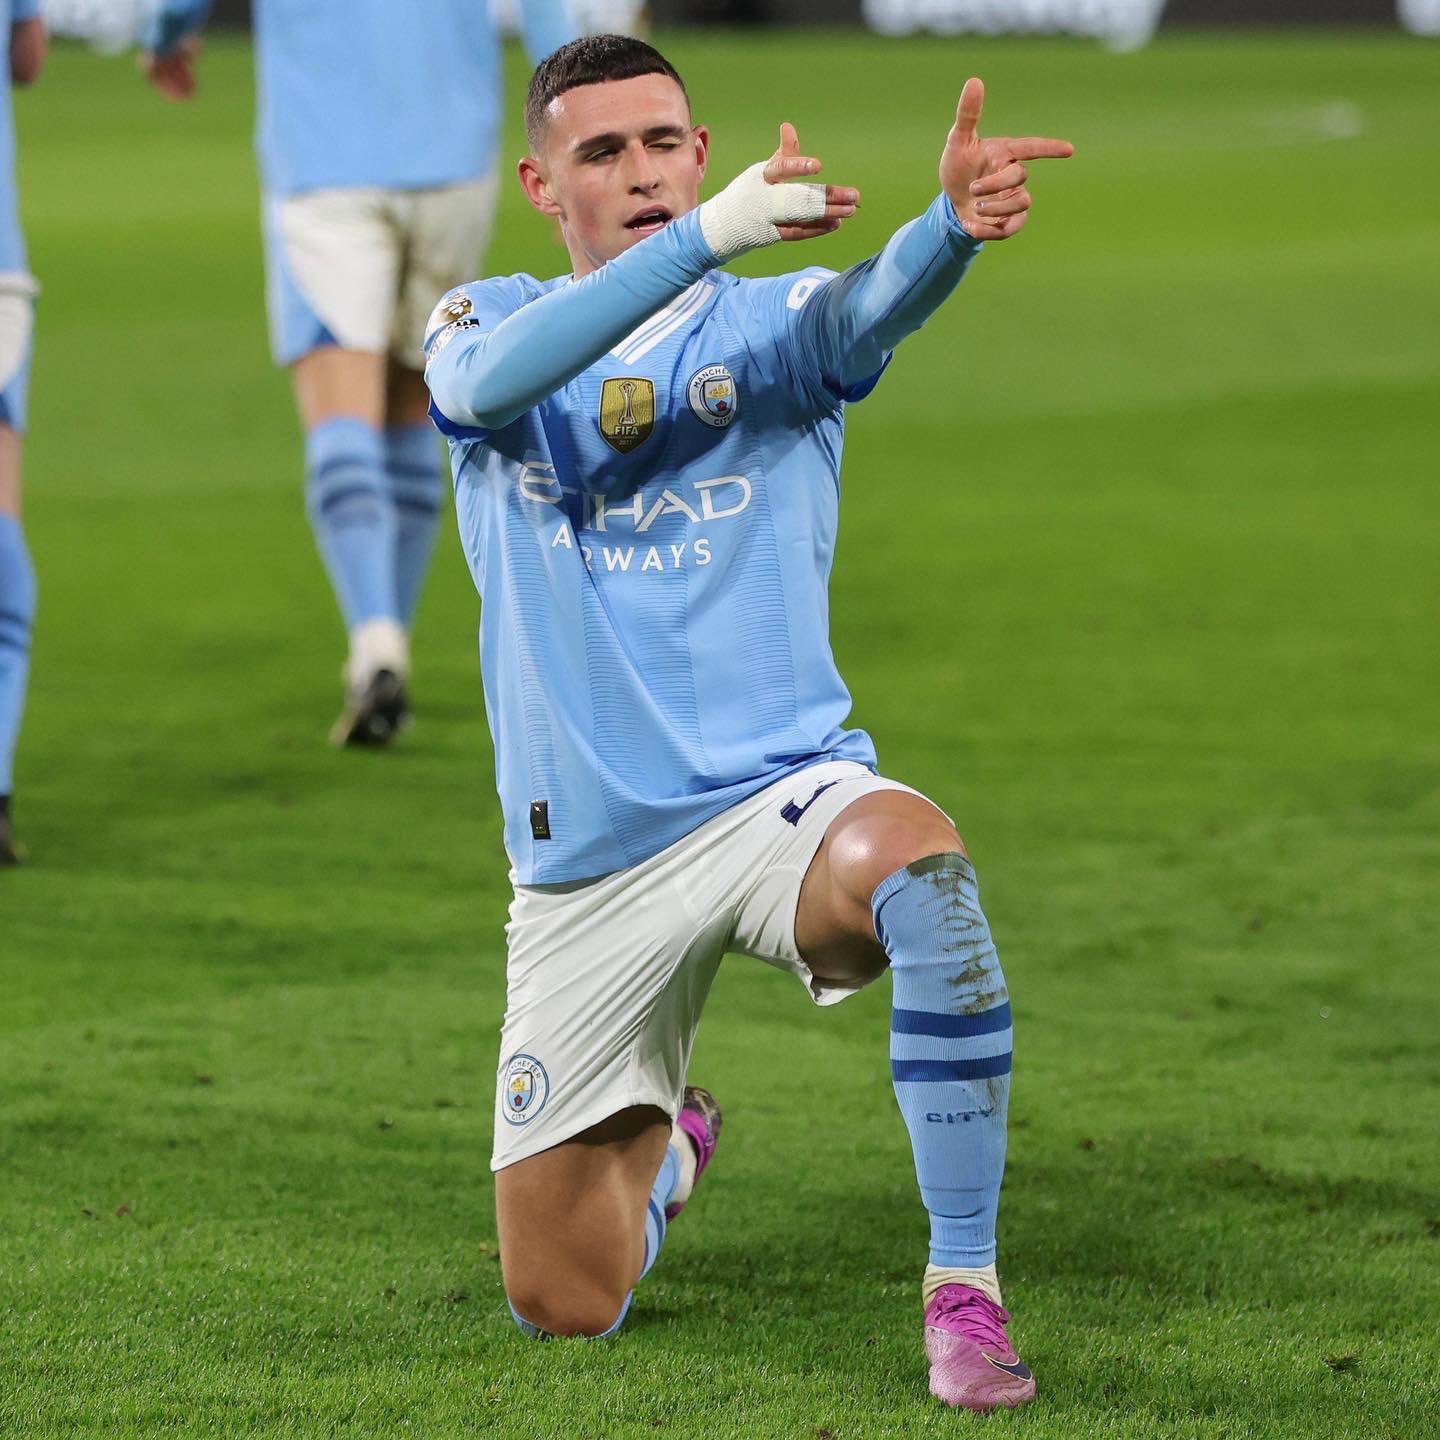 mcfc lads on X: "🗣️ Phil Foden on his celebration: “It's a bit of banter  between me and the lads. They say I shoot a lot in the 5-a-side games.”  https://t.co/6HiLJyqIan" /